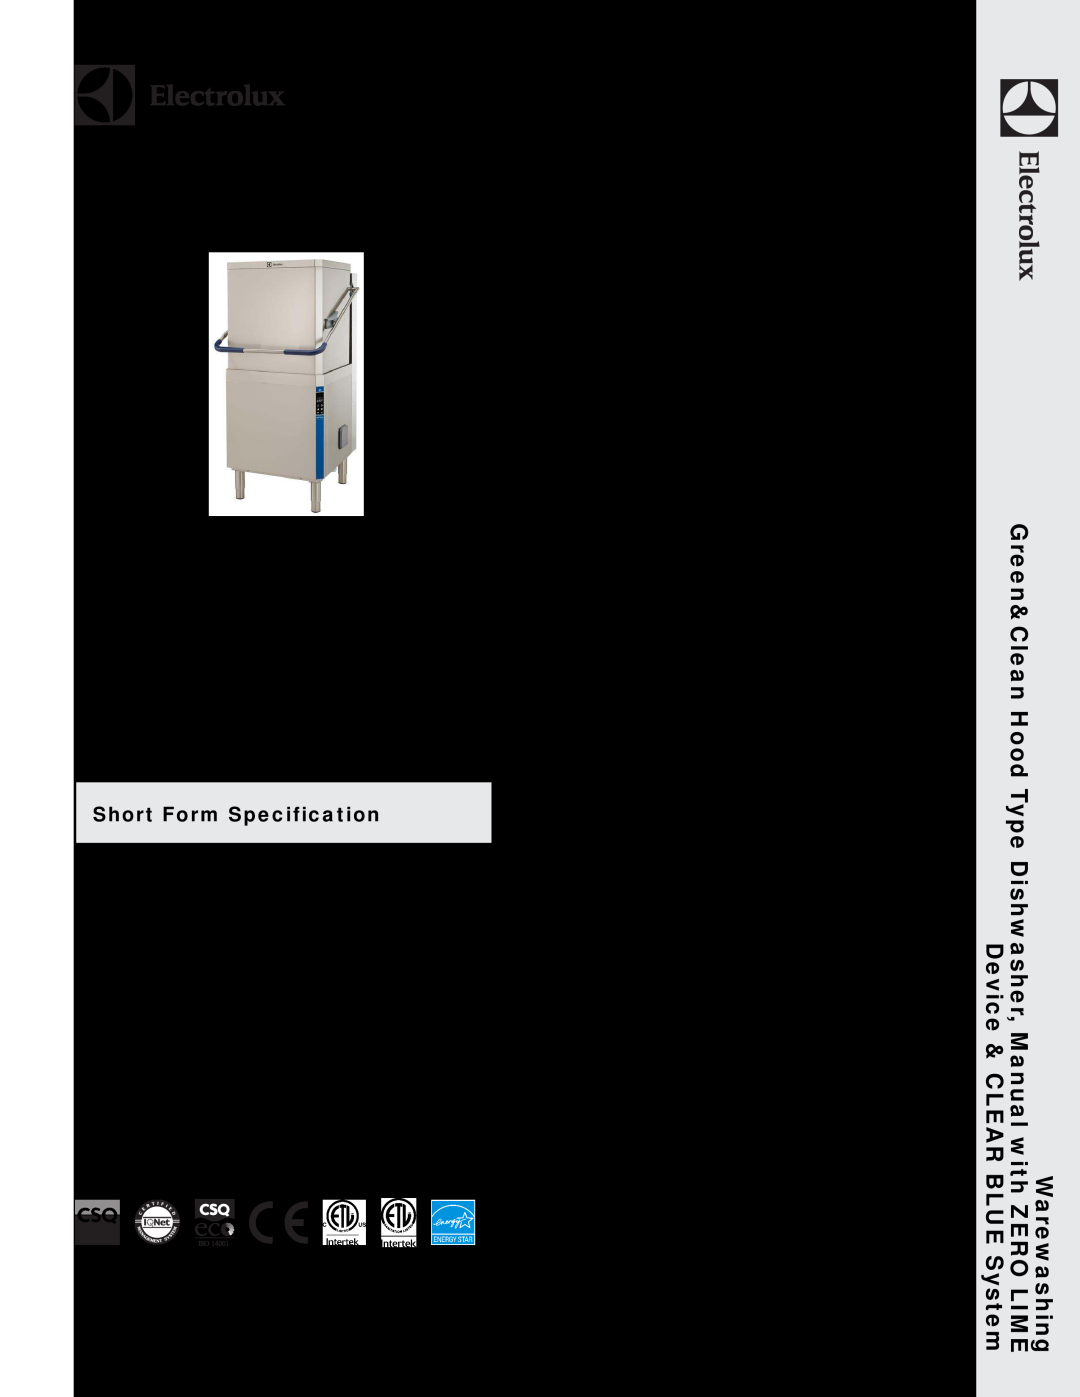 Electrolux 504262 warranty Short Form Specification, Main Features, Construction, Electrolux Professional, Inc, Lime 